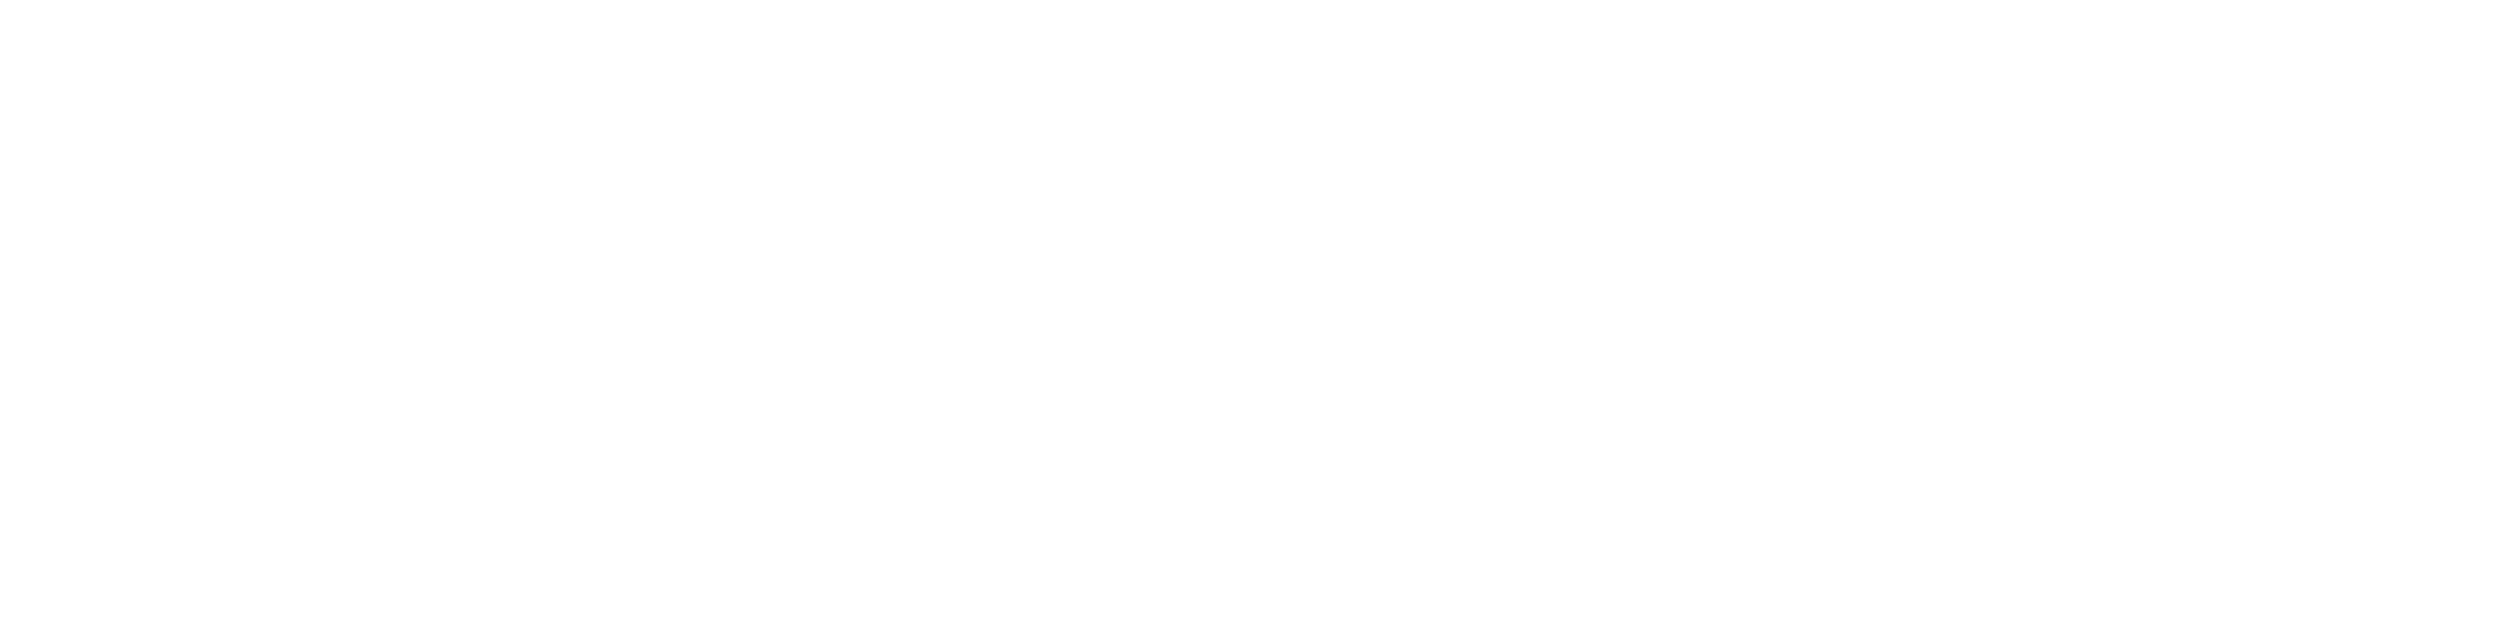 The Highlands at Soldier Hollow